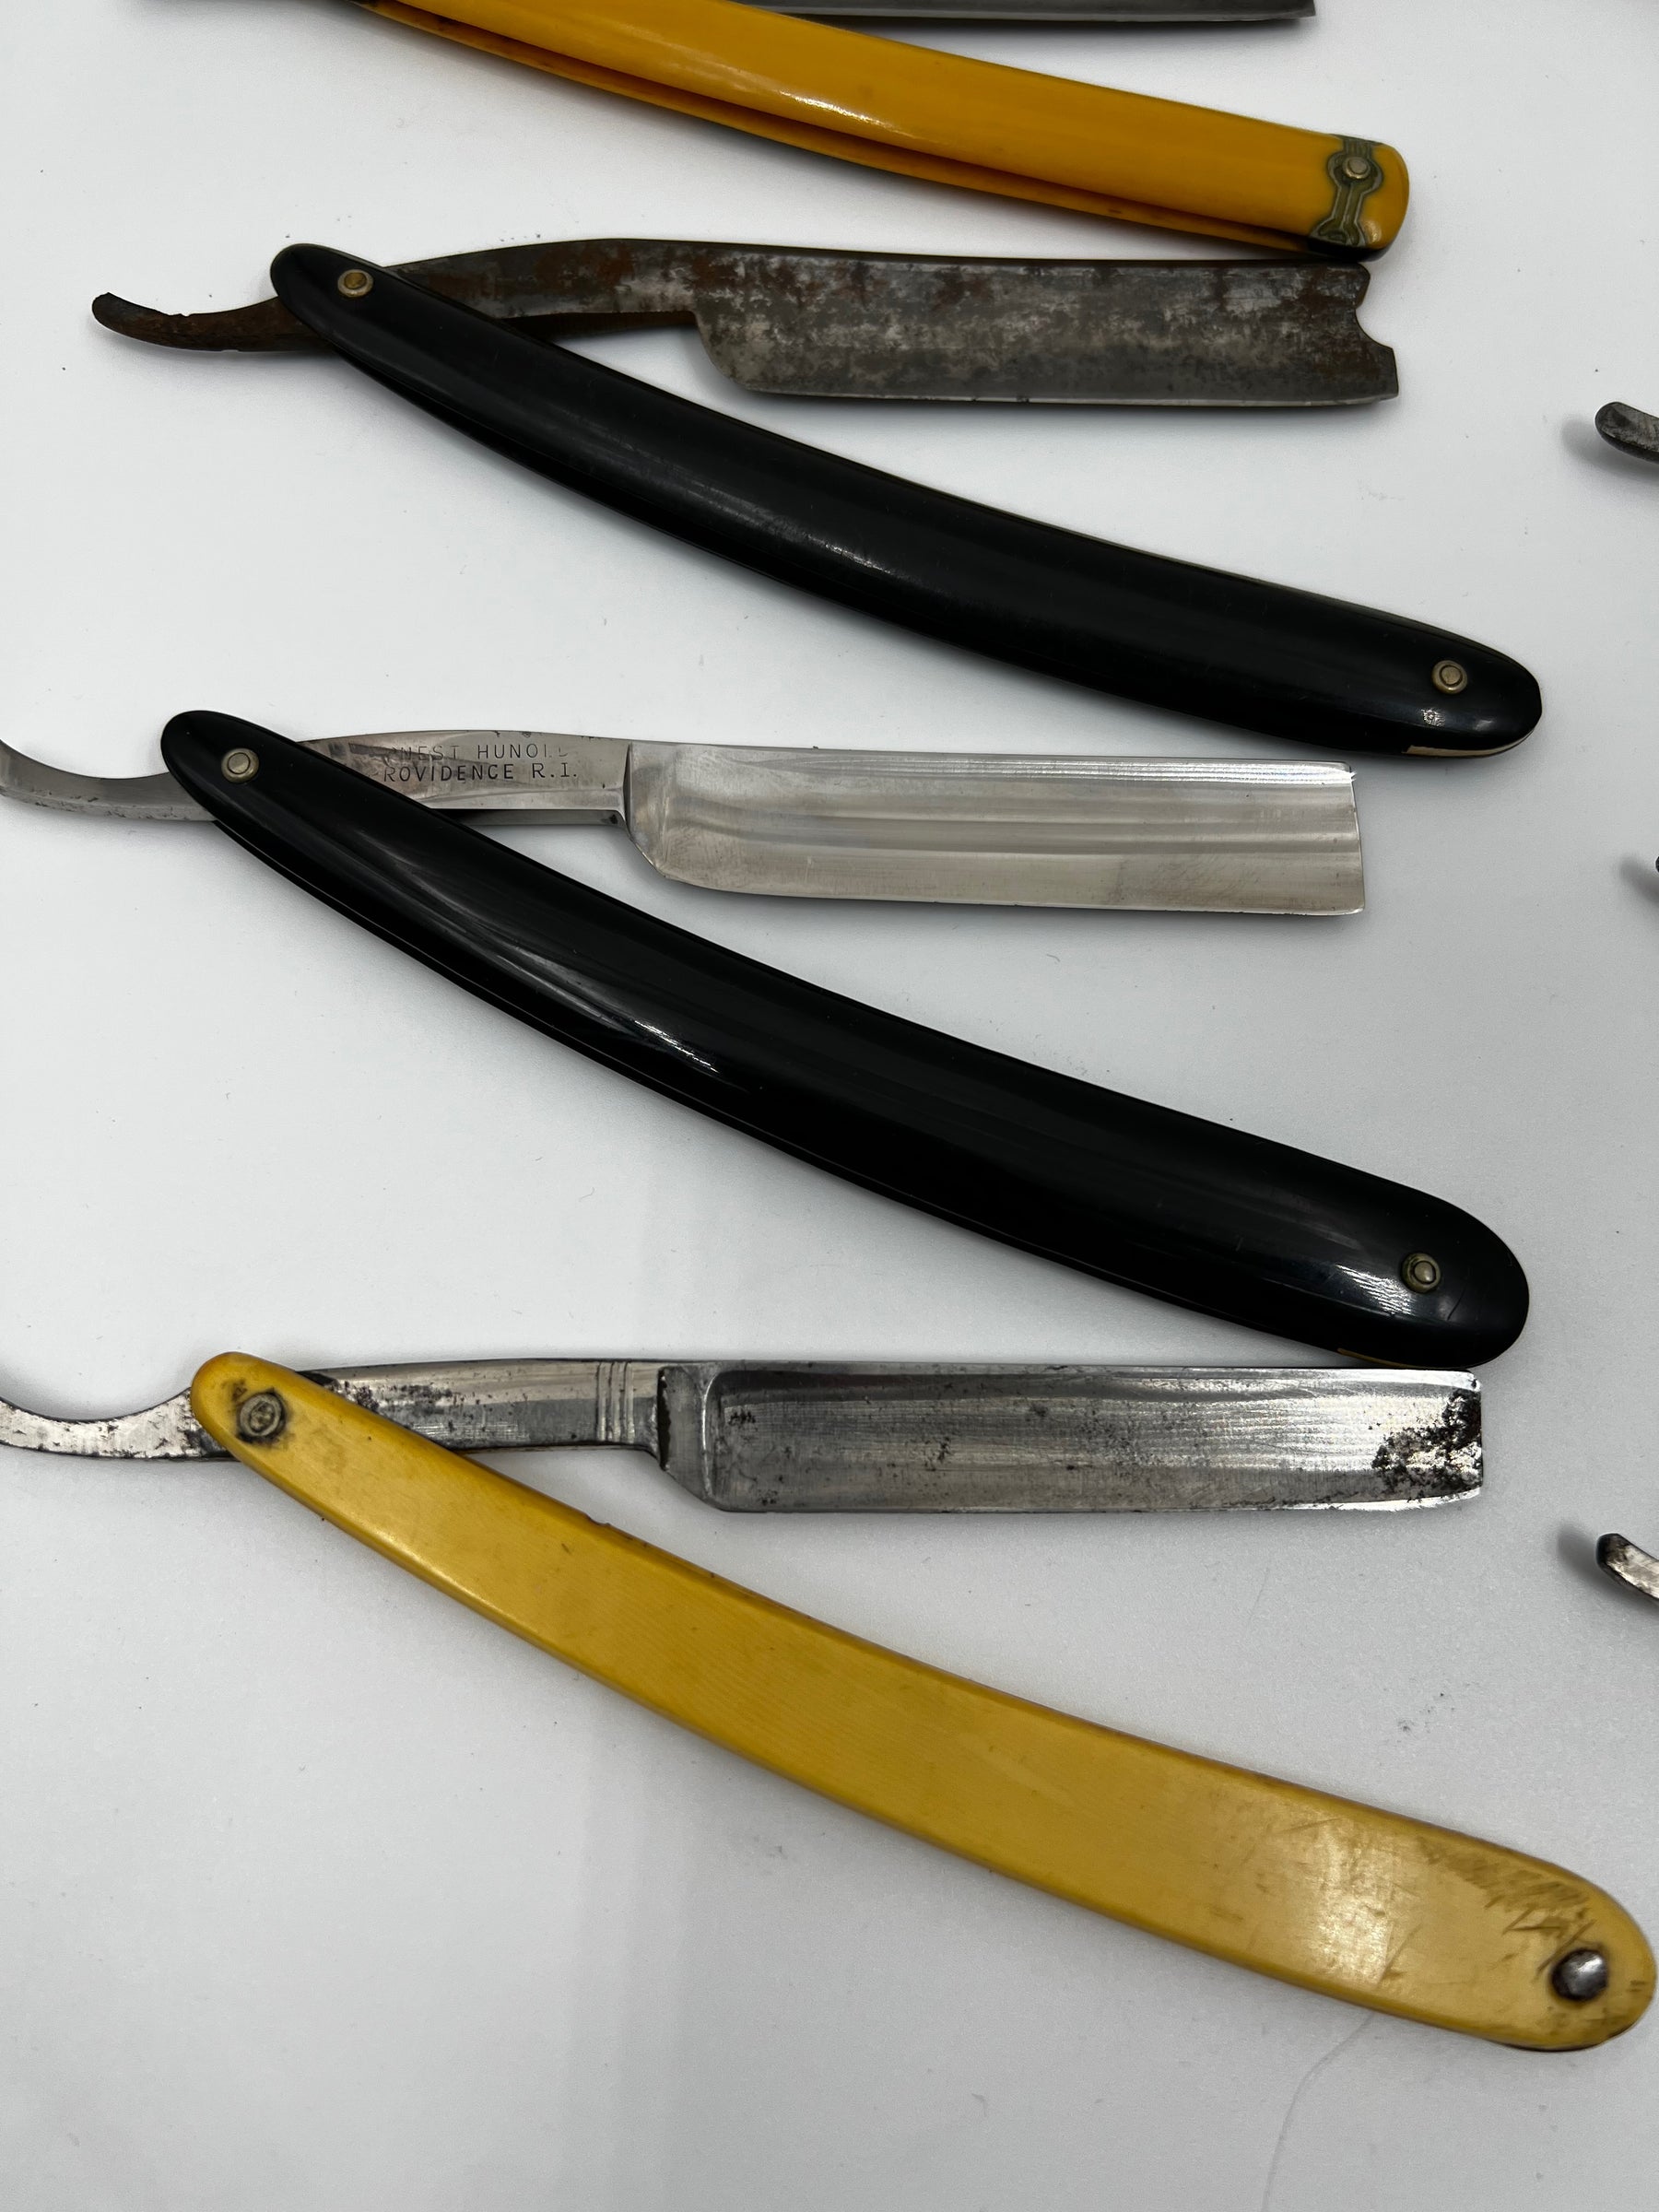 Vintage 10 Straight Razor Lot #12 - May Contain Sheffield, Solingen, Japanese & USA makers, as pictured